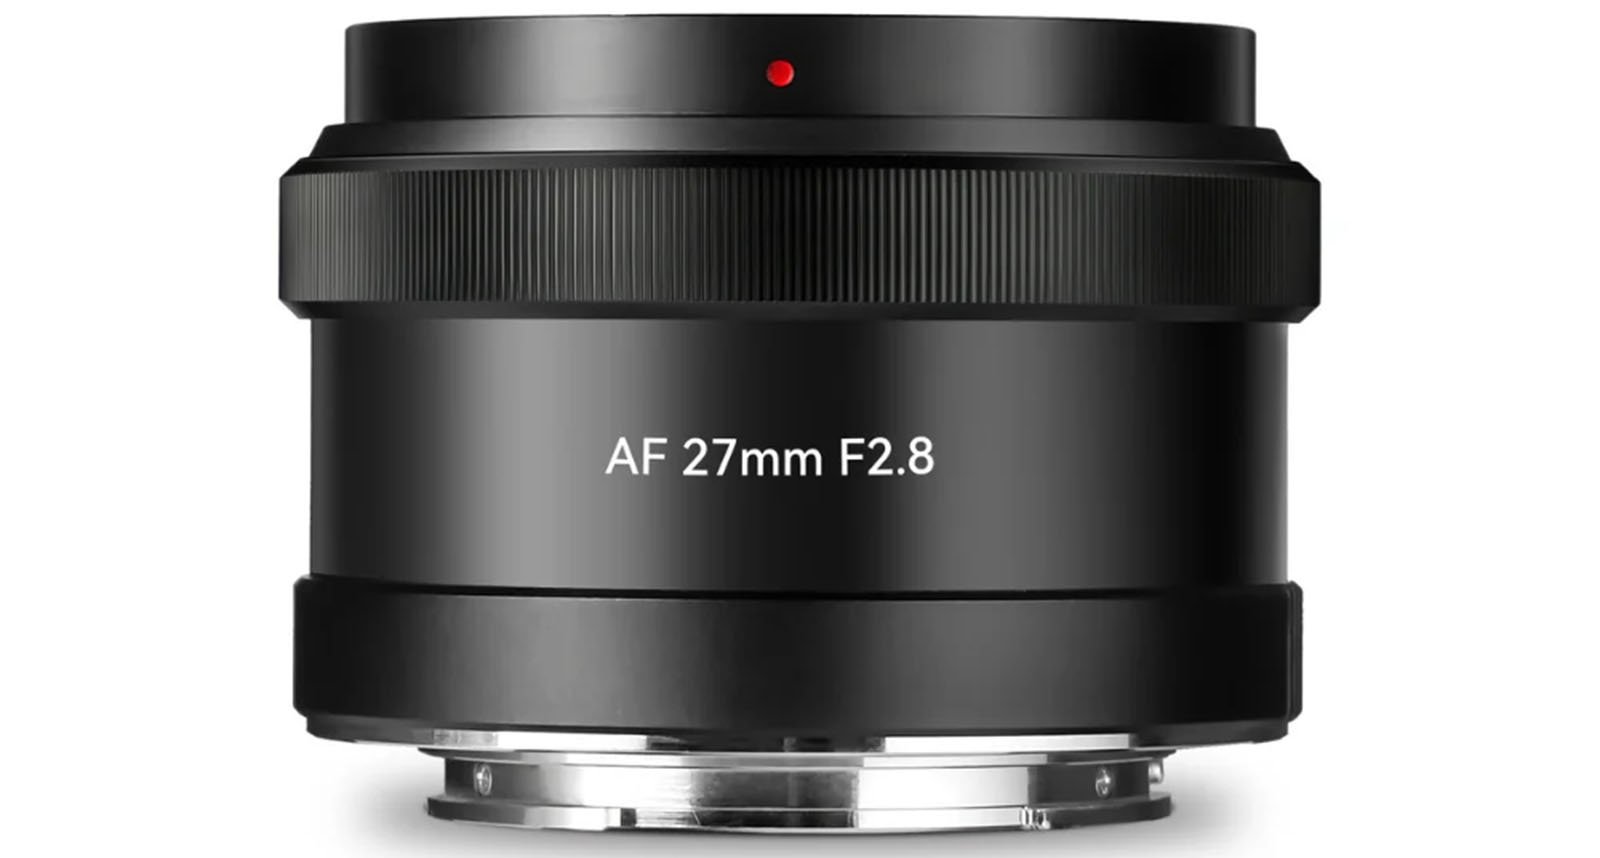 A close-up view of a black af 27mm f2.8 camera lens isolated on a white background, focusing on the lens details and markings.